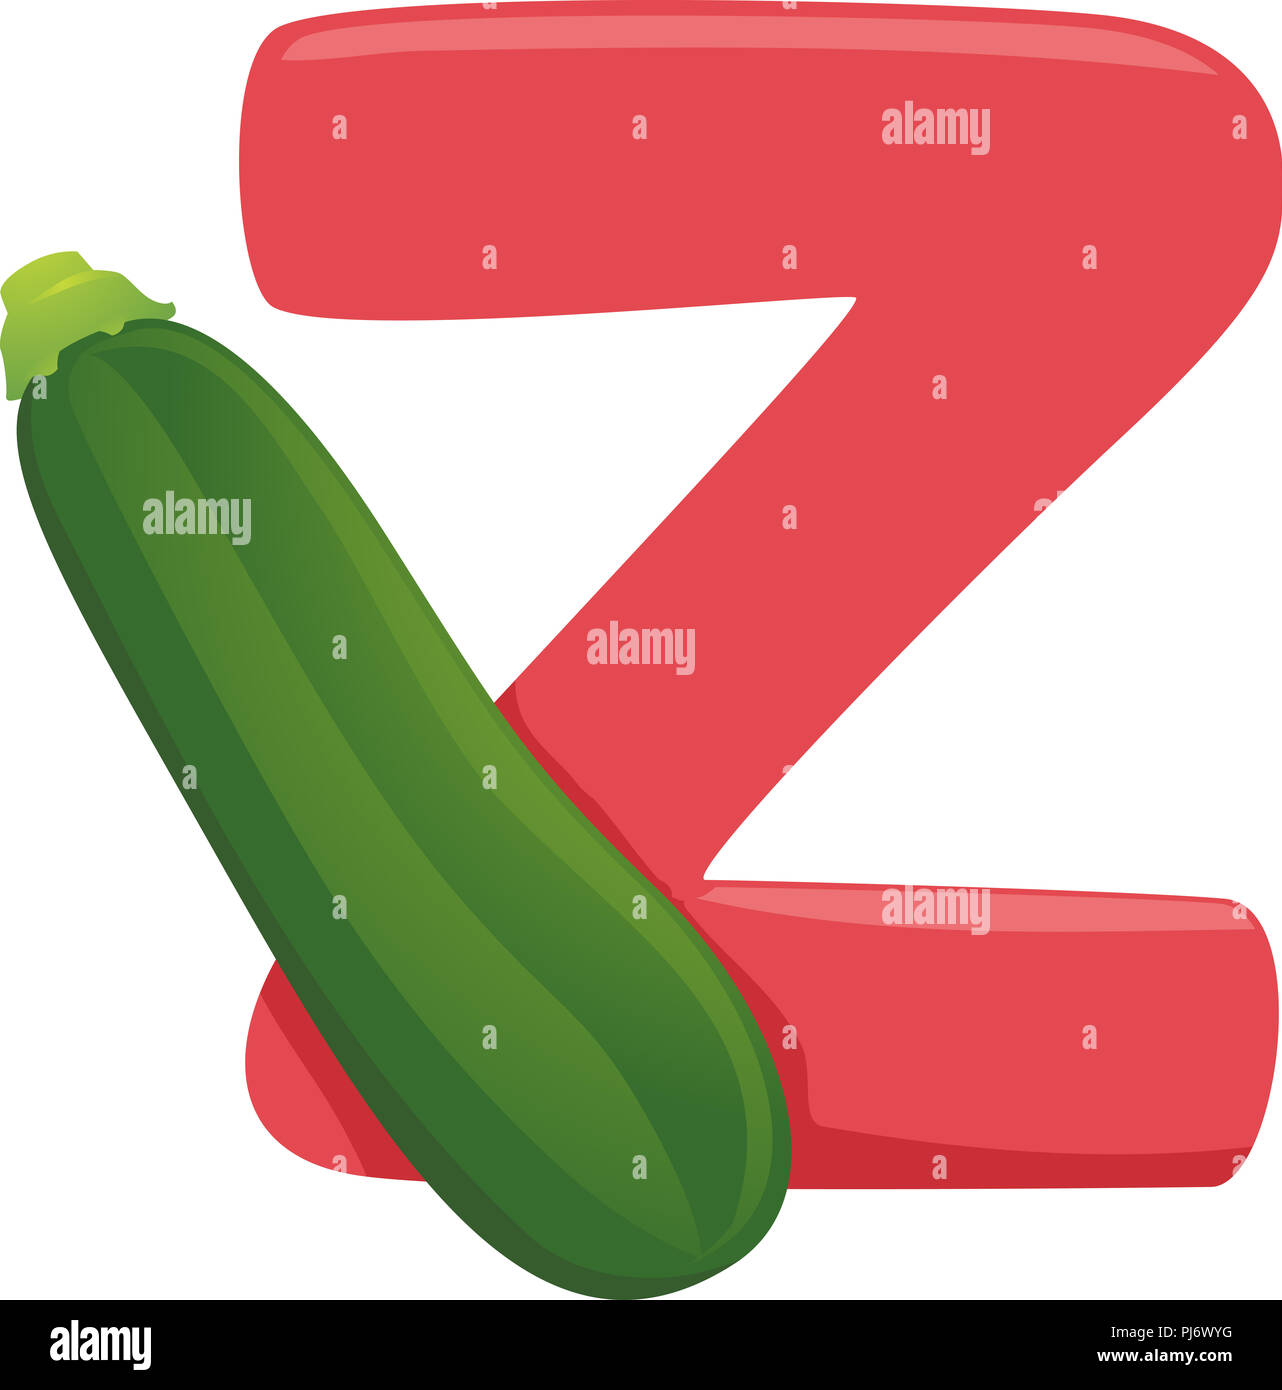 Illustration of Vegetables Alphabet, a Red Letter Z and a Zucchini Stock Photo